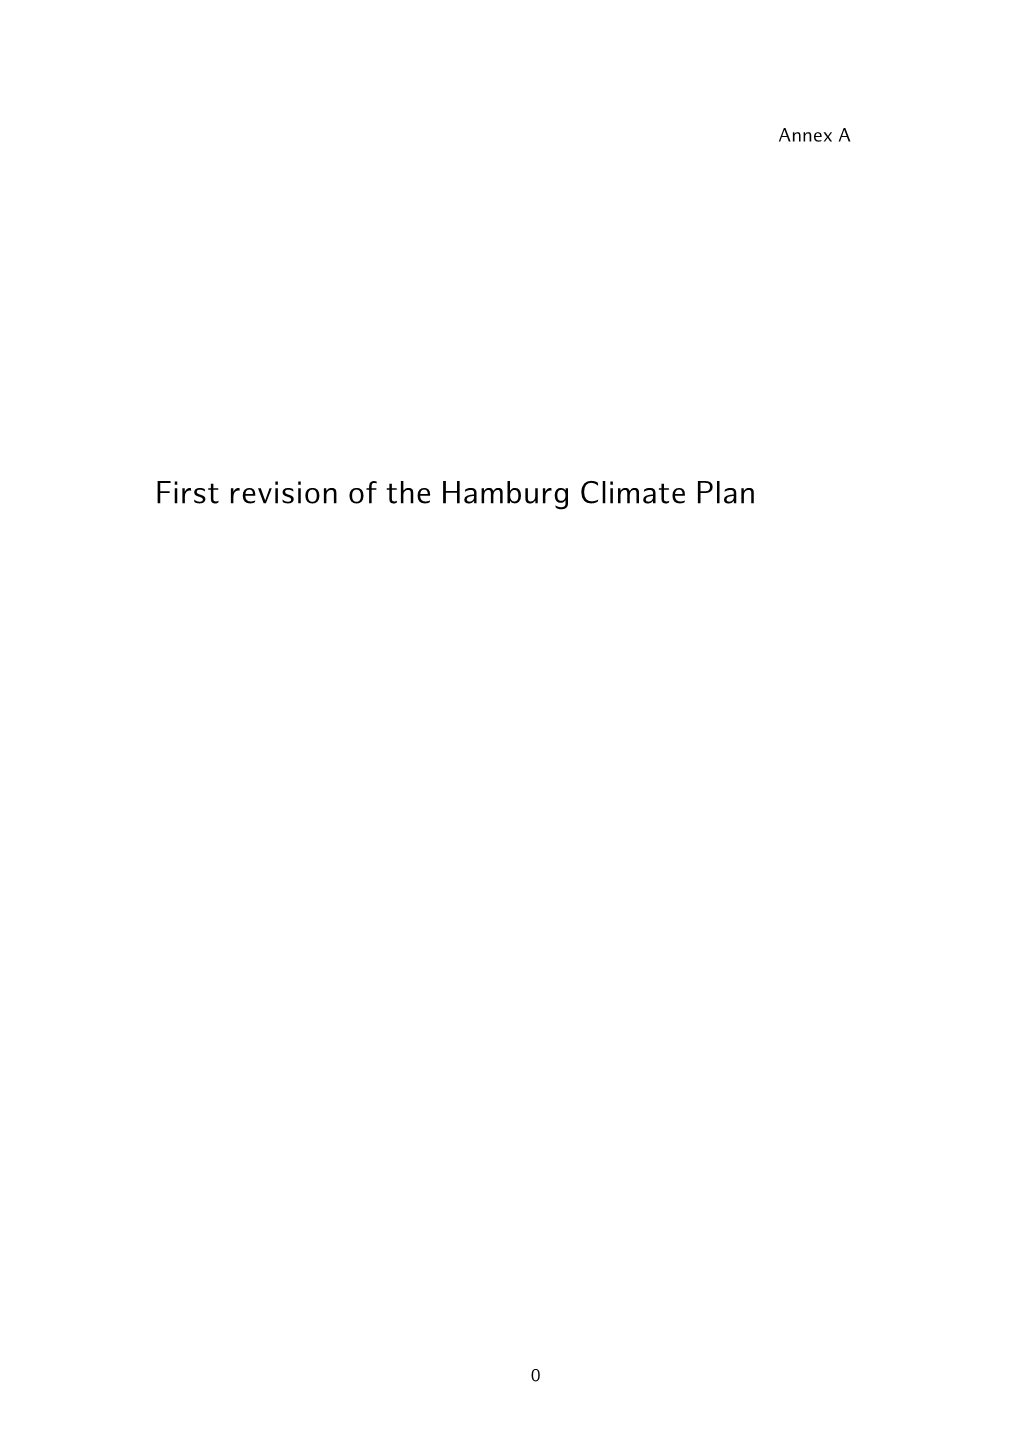 First Revision of the Hamburg Climate Plan